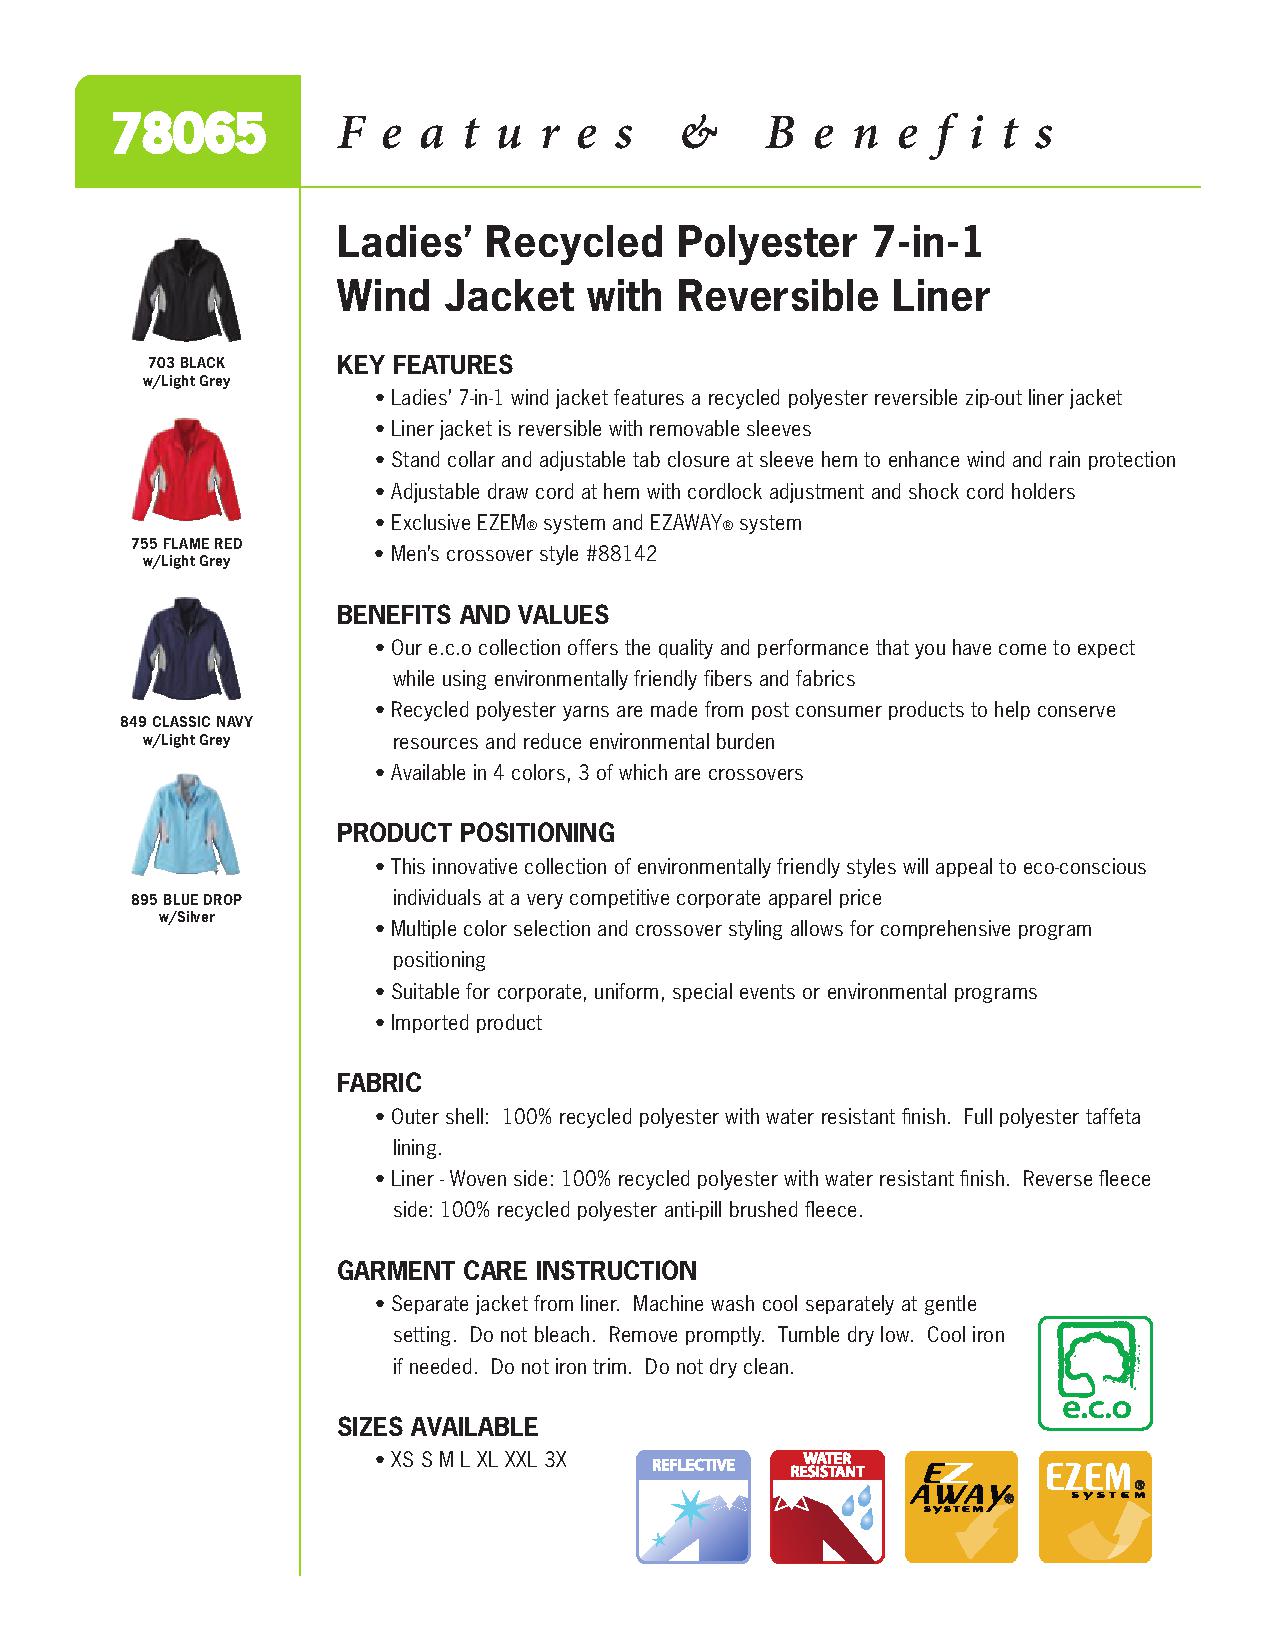 Ash City e.c.o Outerwear 78065 - Ladies' Recycled Polyester 7-In-1 Wind Jacket With Reversible Liner